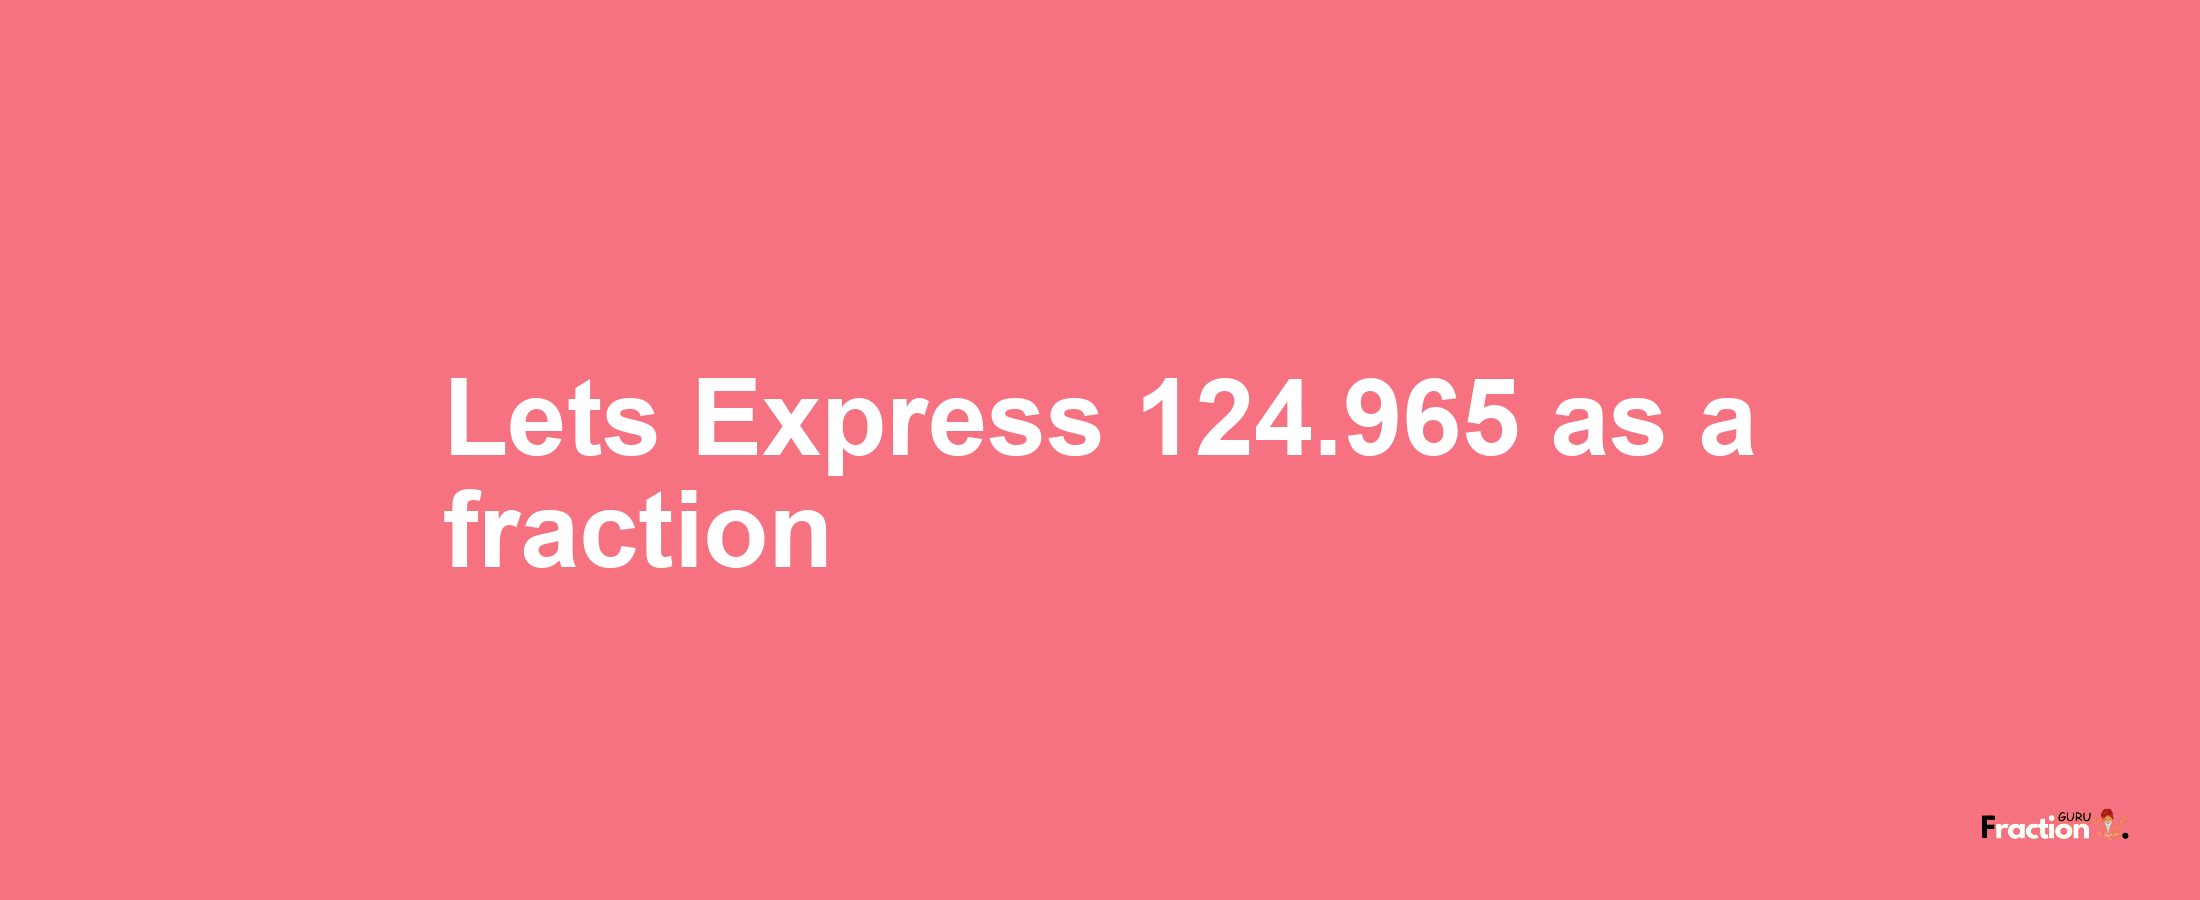 Lets Express 124.965 as afraction